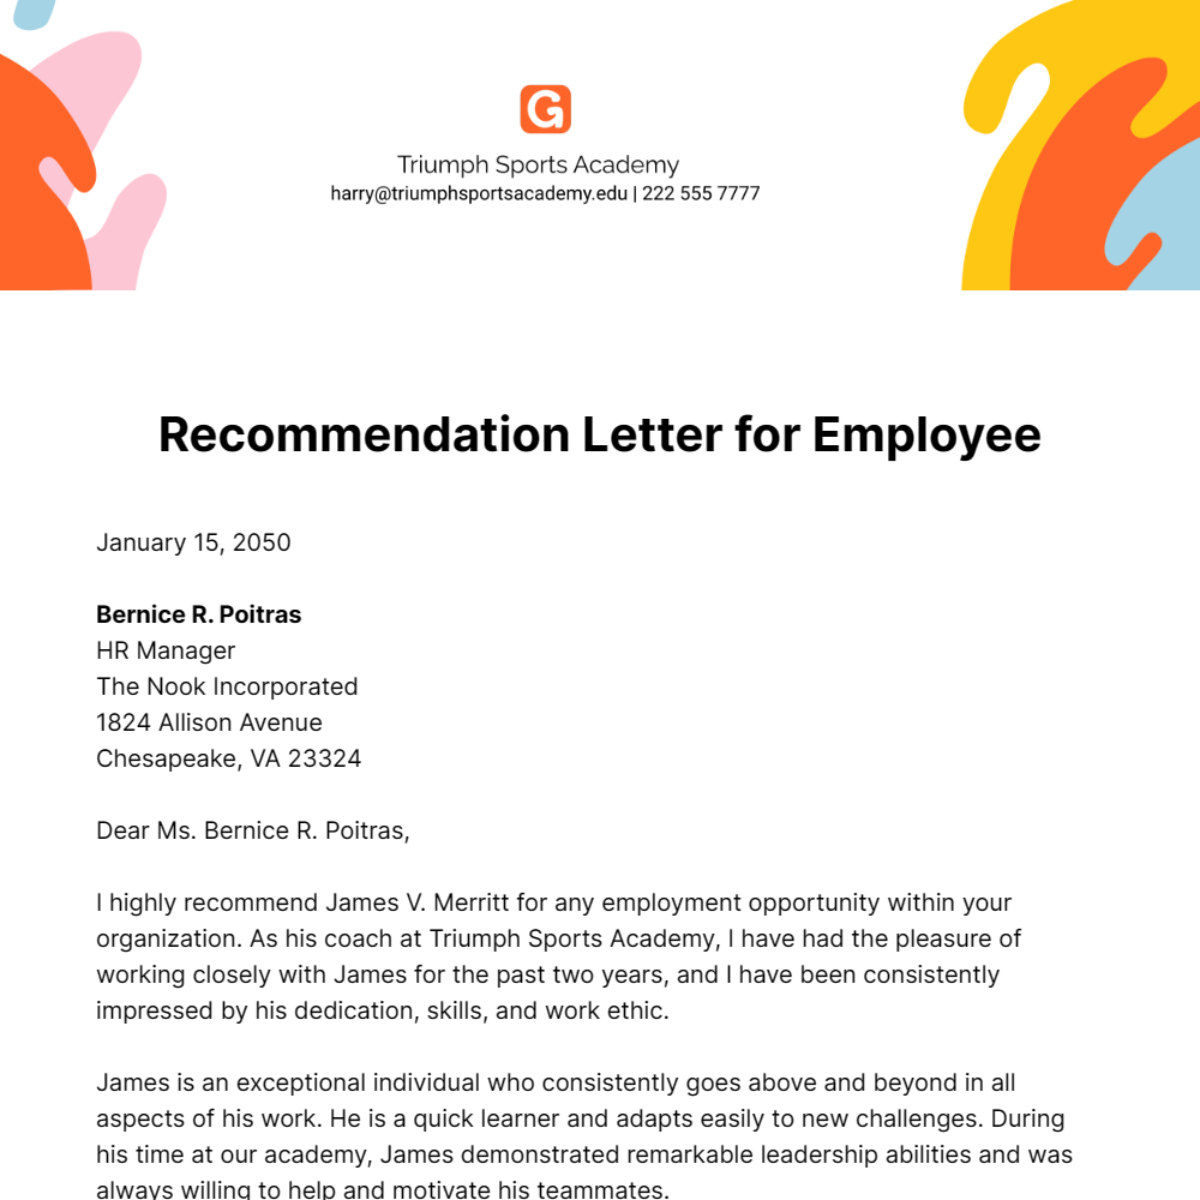 Recommendation Letter for Employee Template